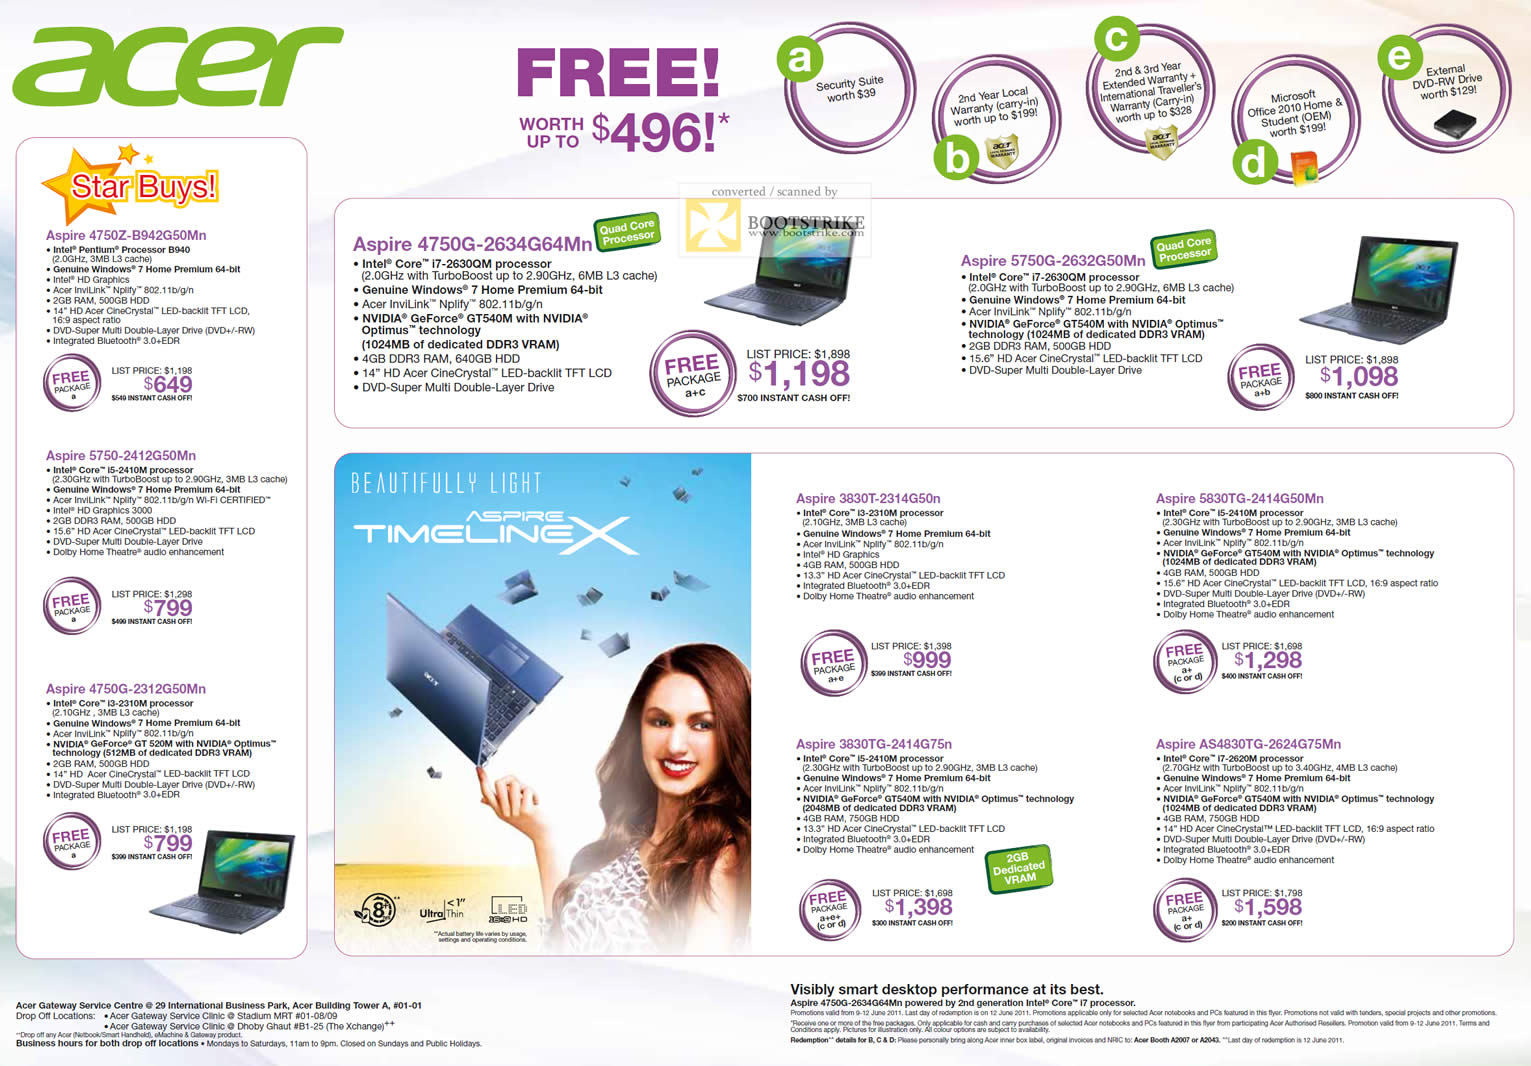 PC Show 2011 price list image brochure of Acer Notebooks Aspire 4750Z 5750 4750G 3830TG 3830T 5830TG AS4830TG 5750G Timeline X